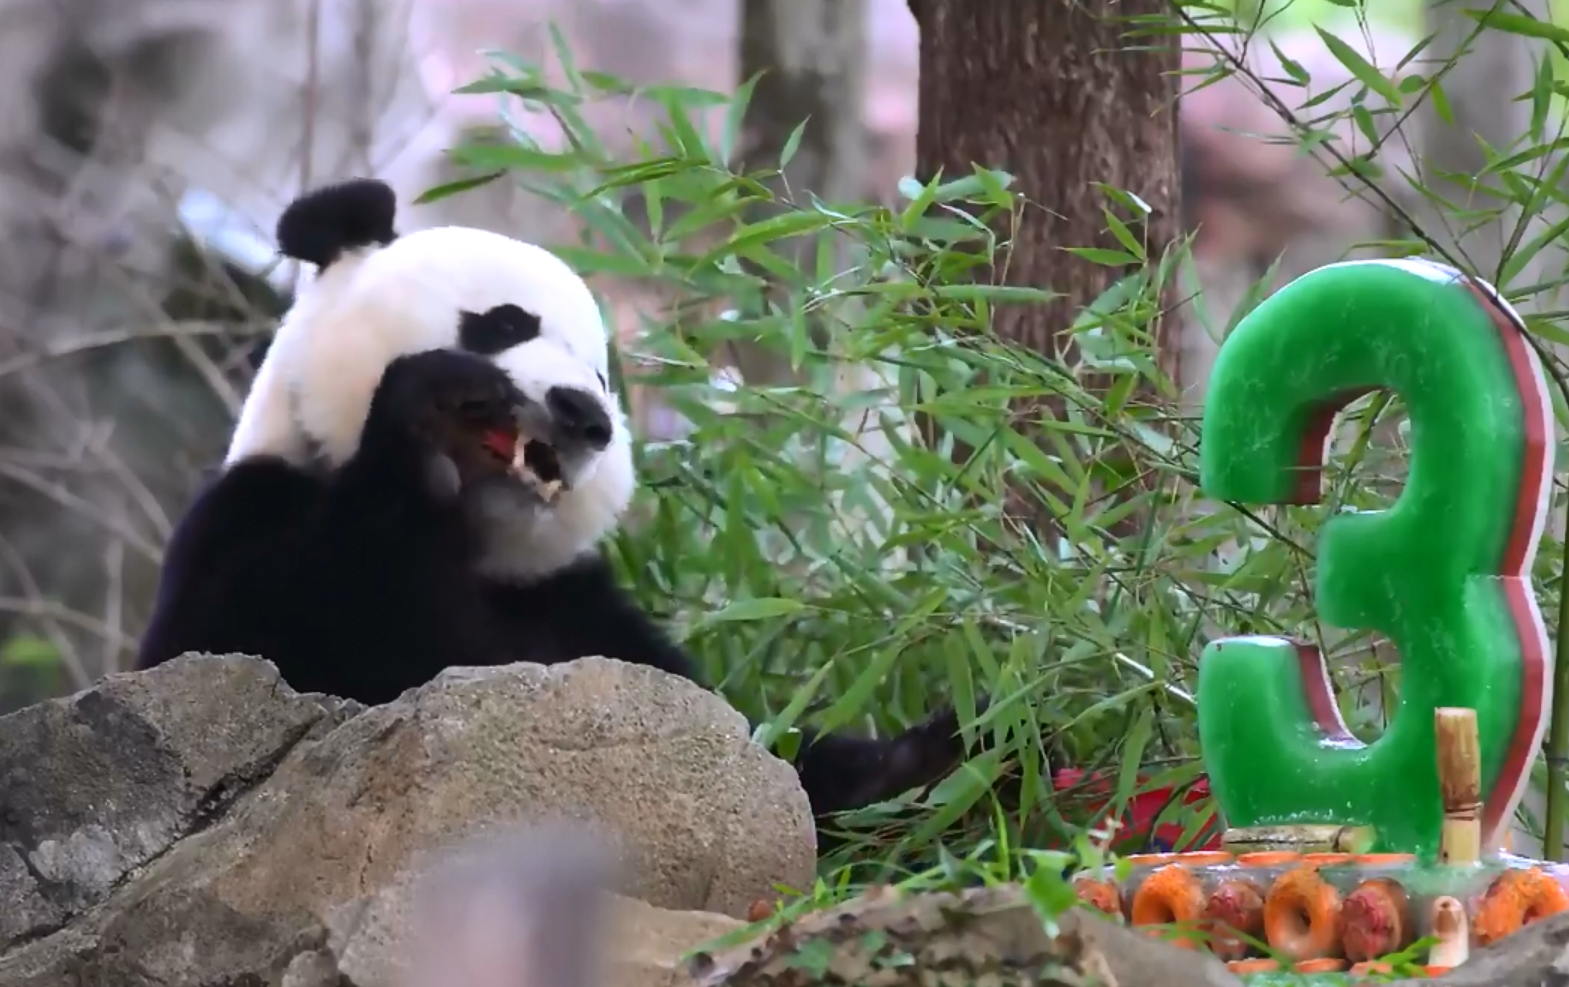 Bei Bei chowed down on frozen treats while he celebrated his third birthday on Wednesday. (Courtesy National Zoo via Twitter)